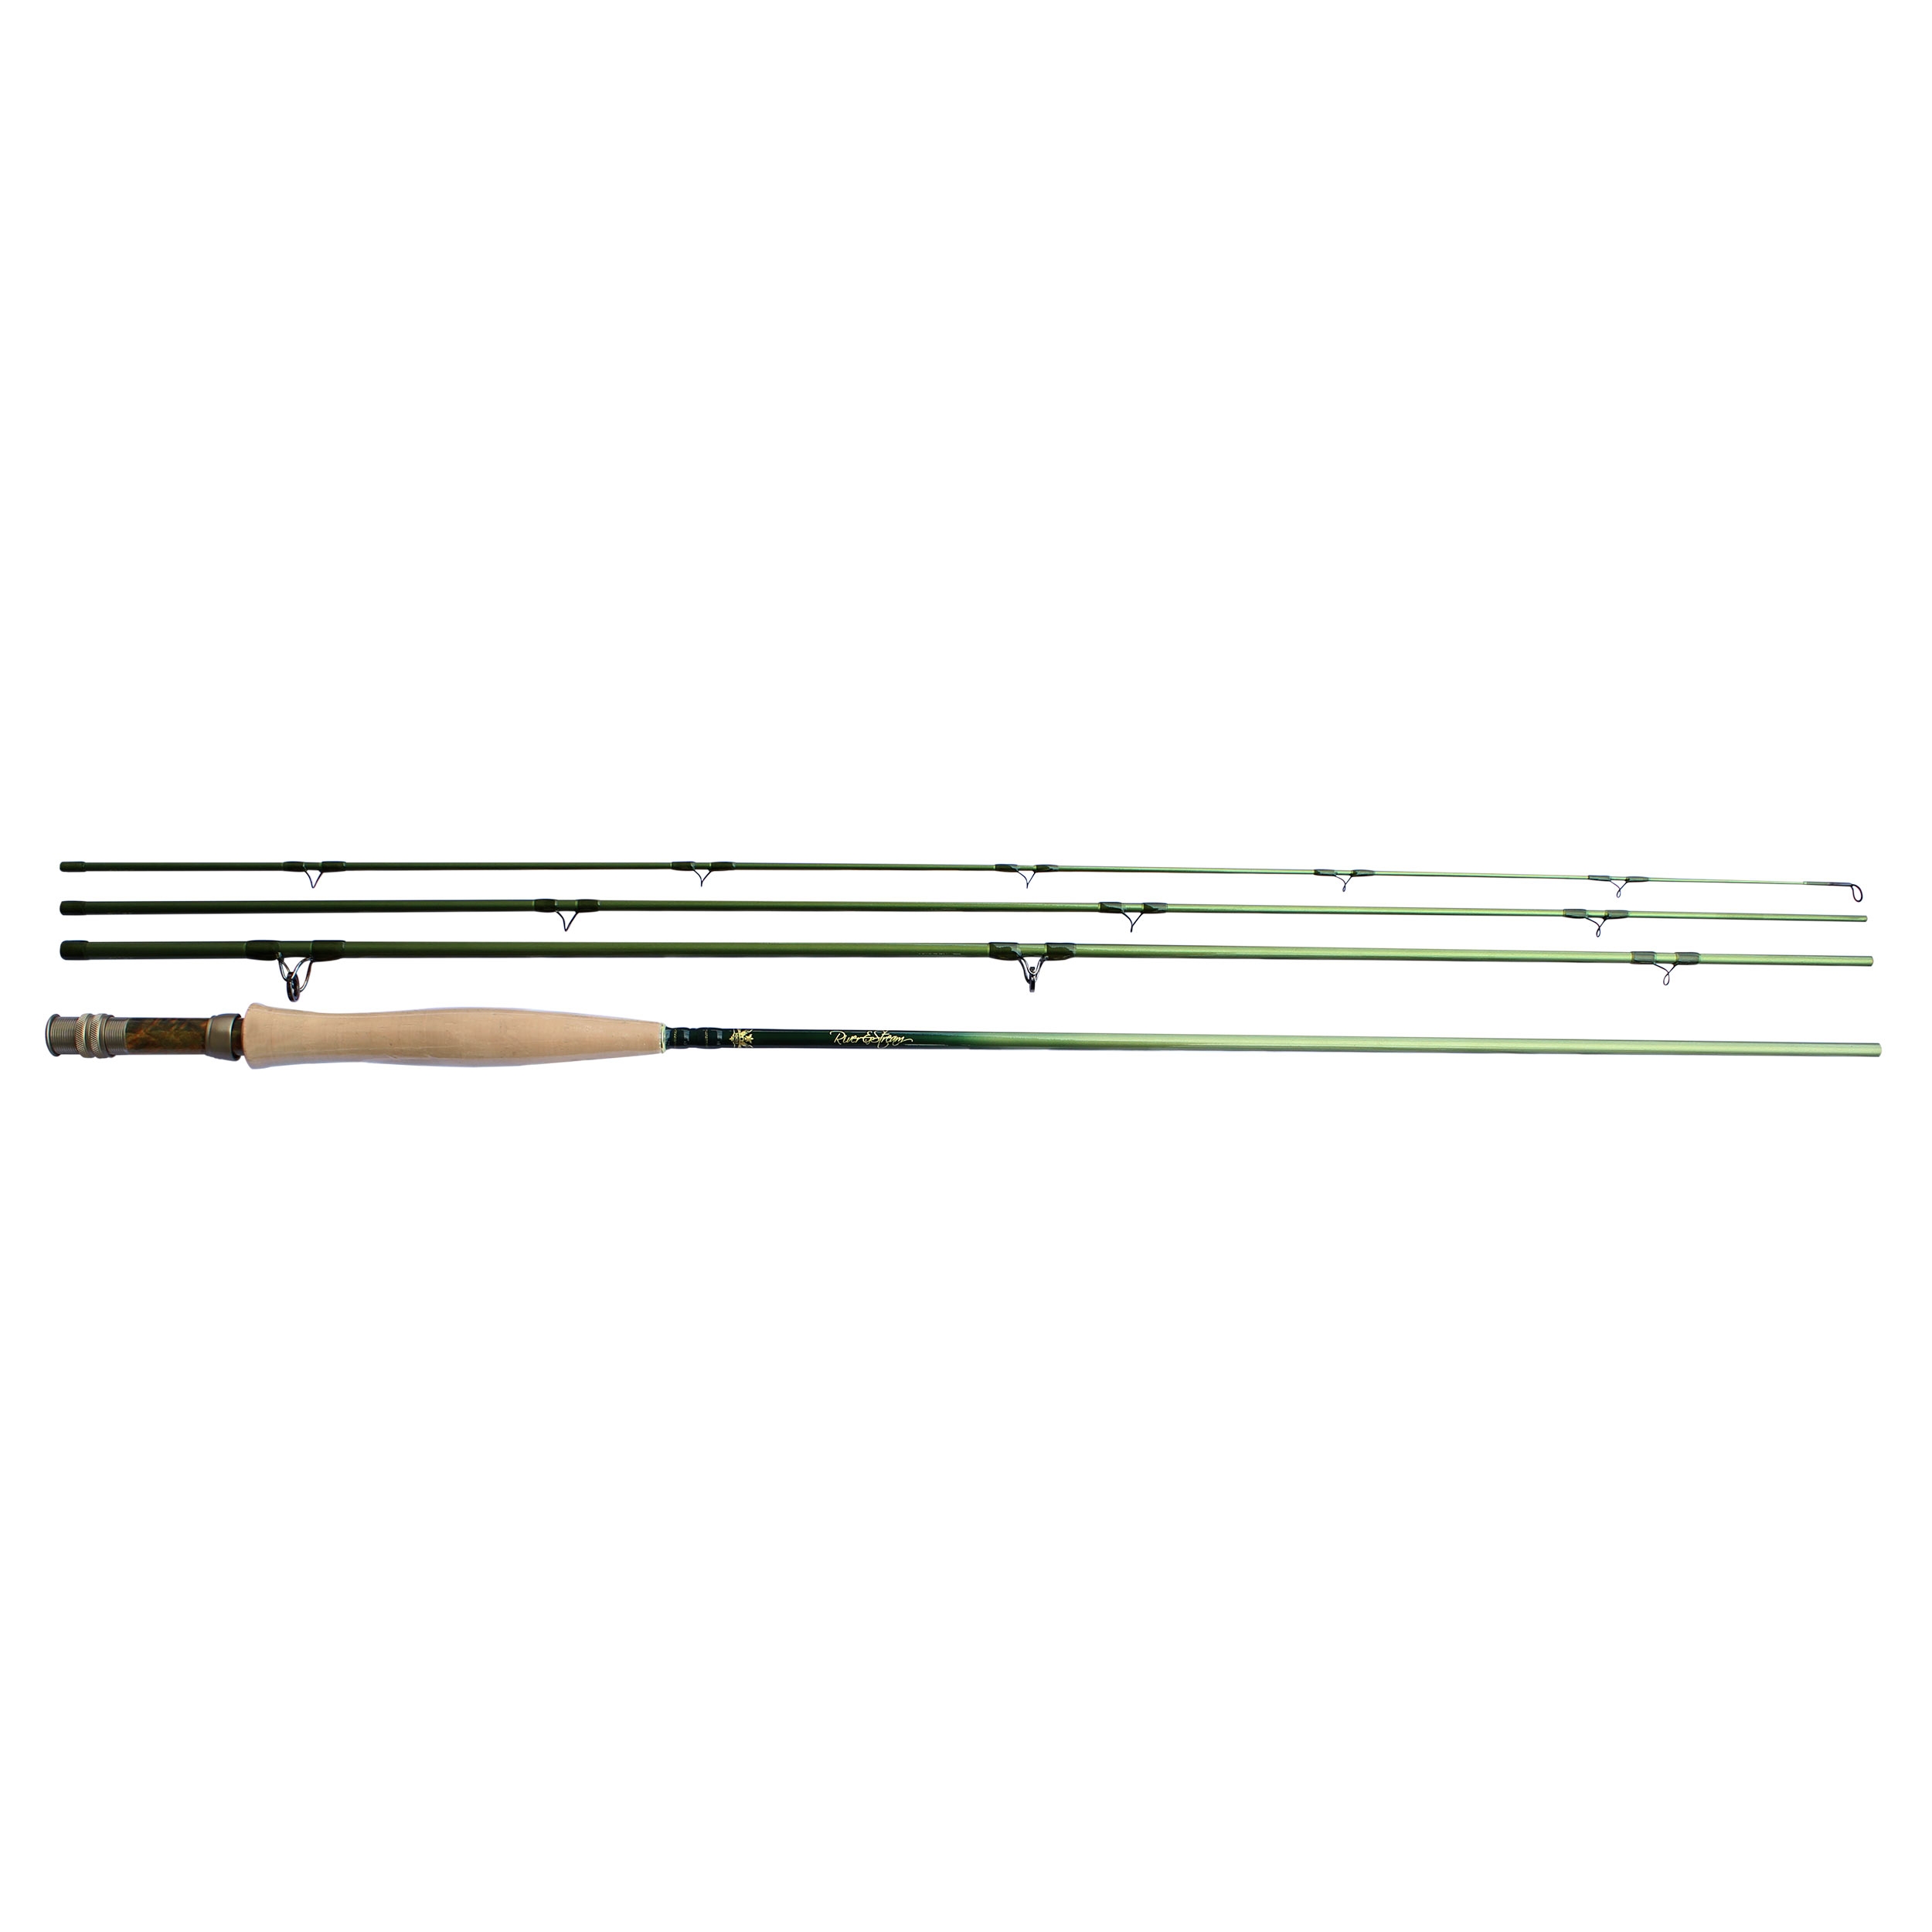 Wychwood River and Stream - Single Handed Trout Fly Fishing Rods